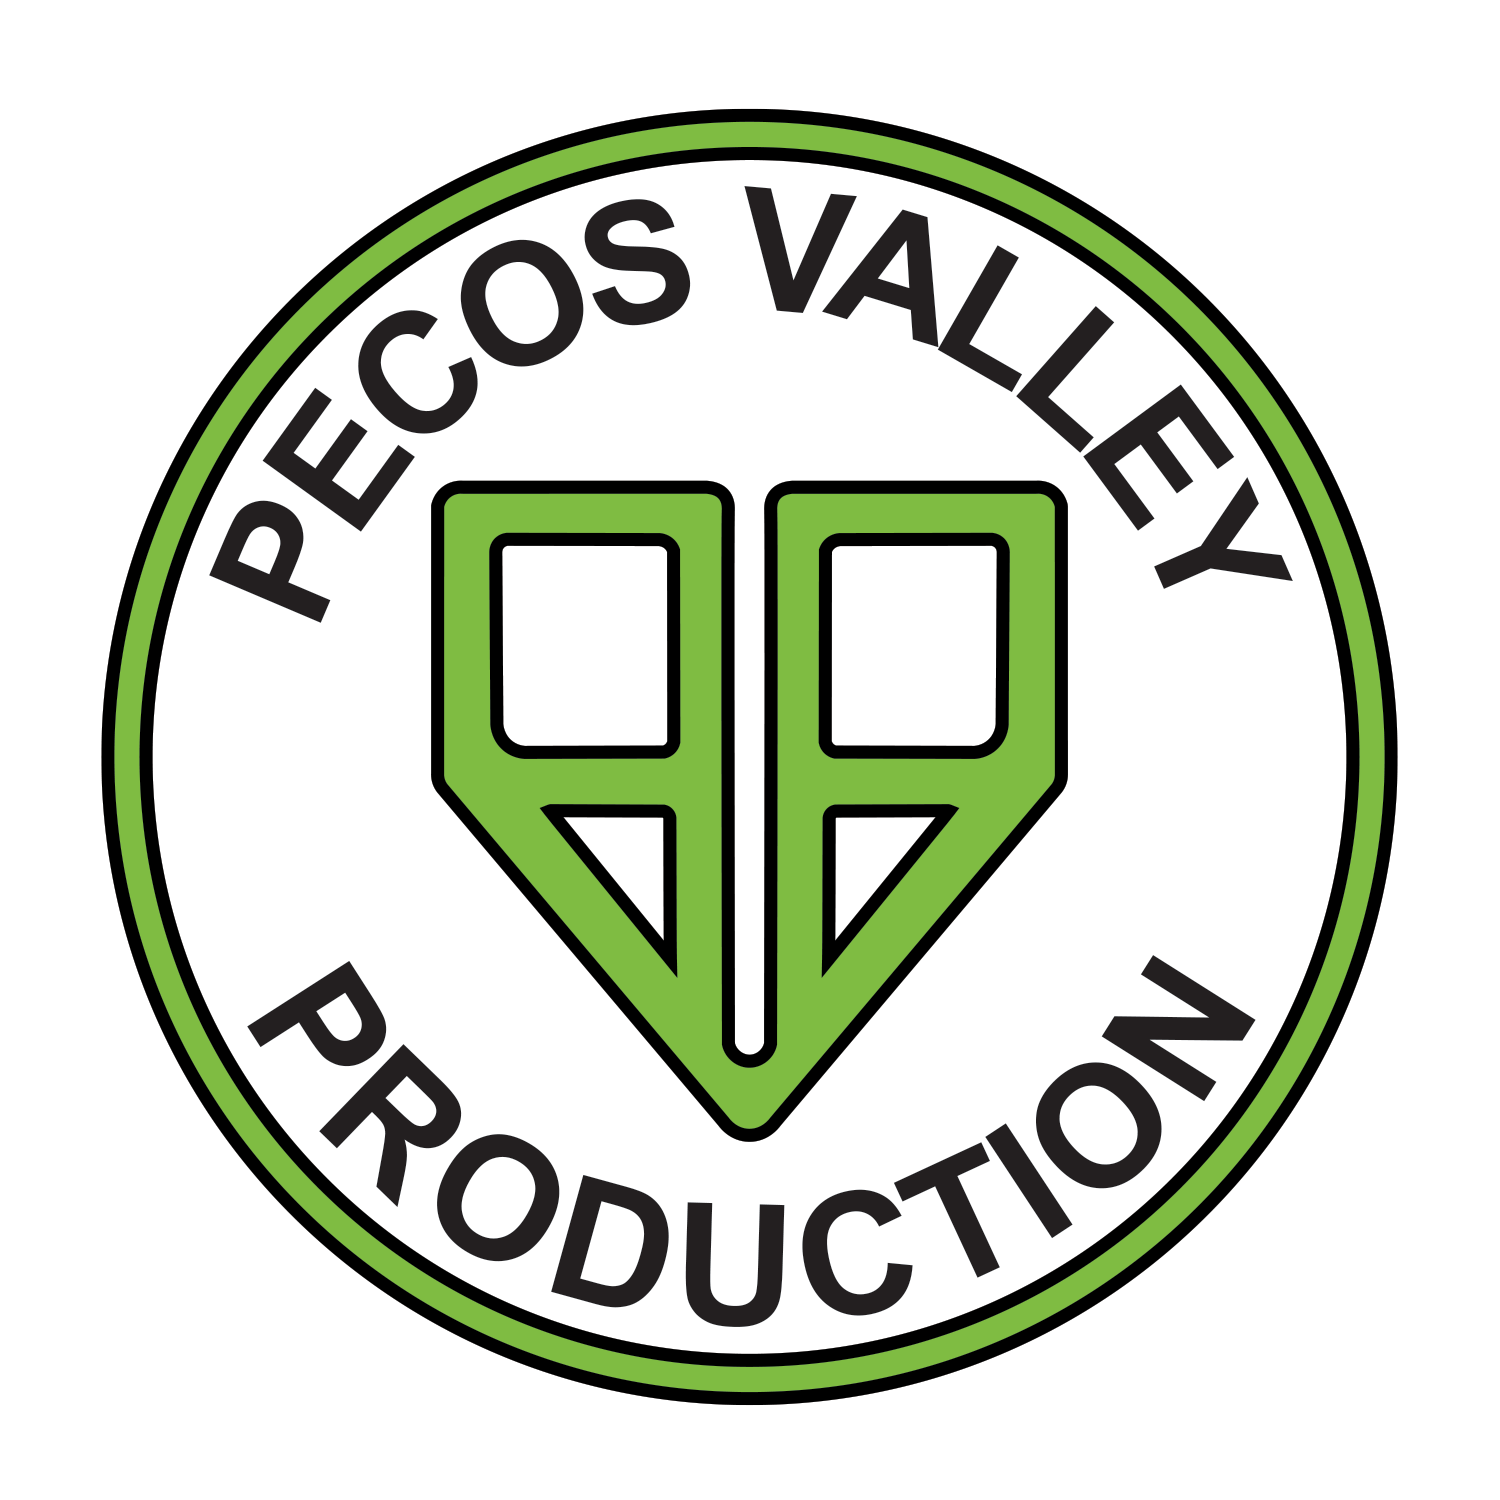 Pecos Valley Production - Roswell logo